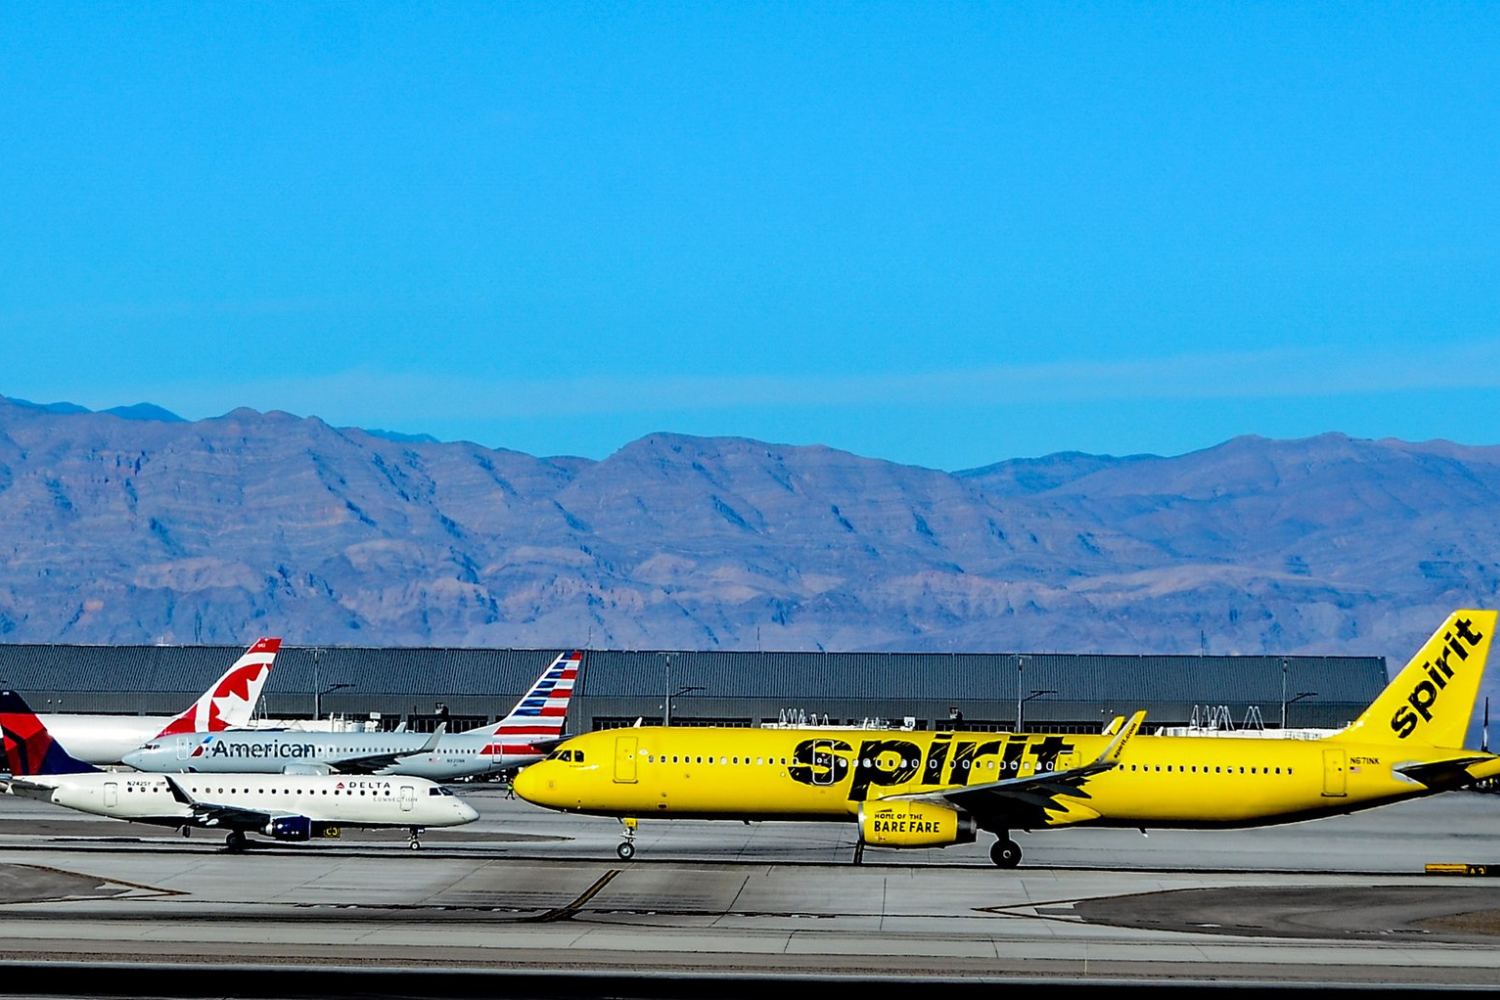 yellow colr spiritvairlines flight and white color american airlines flight at an airport